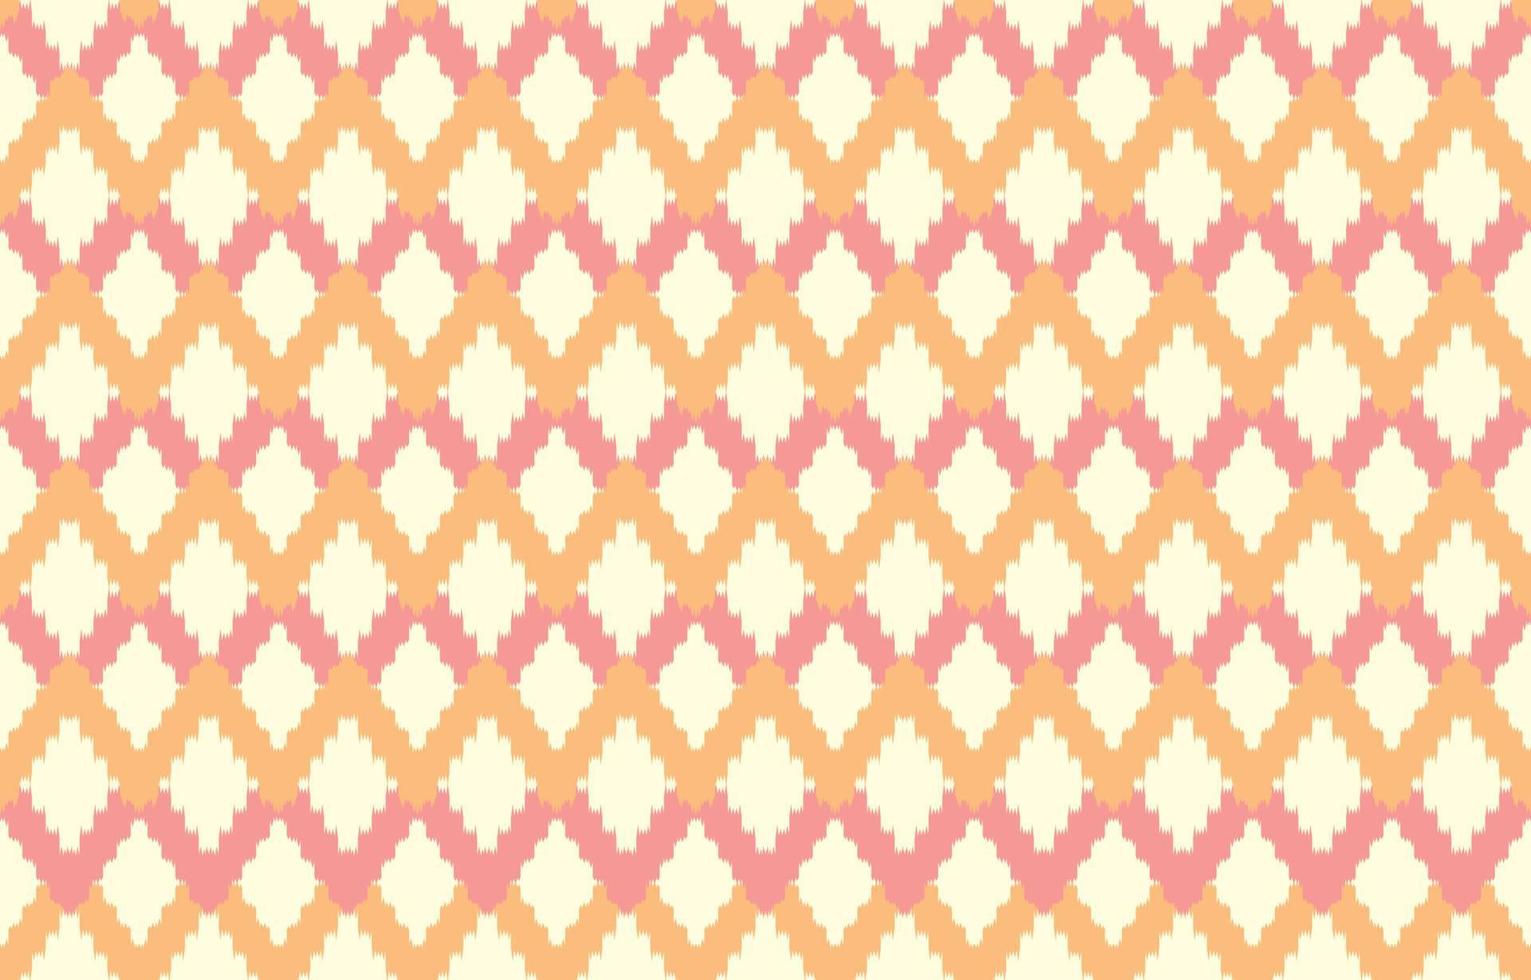 Beautiful Ethnic abstract ikat art. Seamless Kasuri pattern in tribal, folk embroidery, and Mexican style.Aztec geometric art ornament print.Design for carpet, wallpaper, clothing, wrapping, fabric. vector